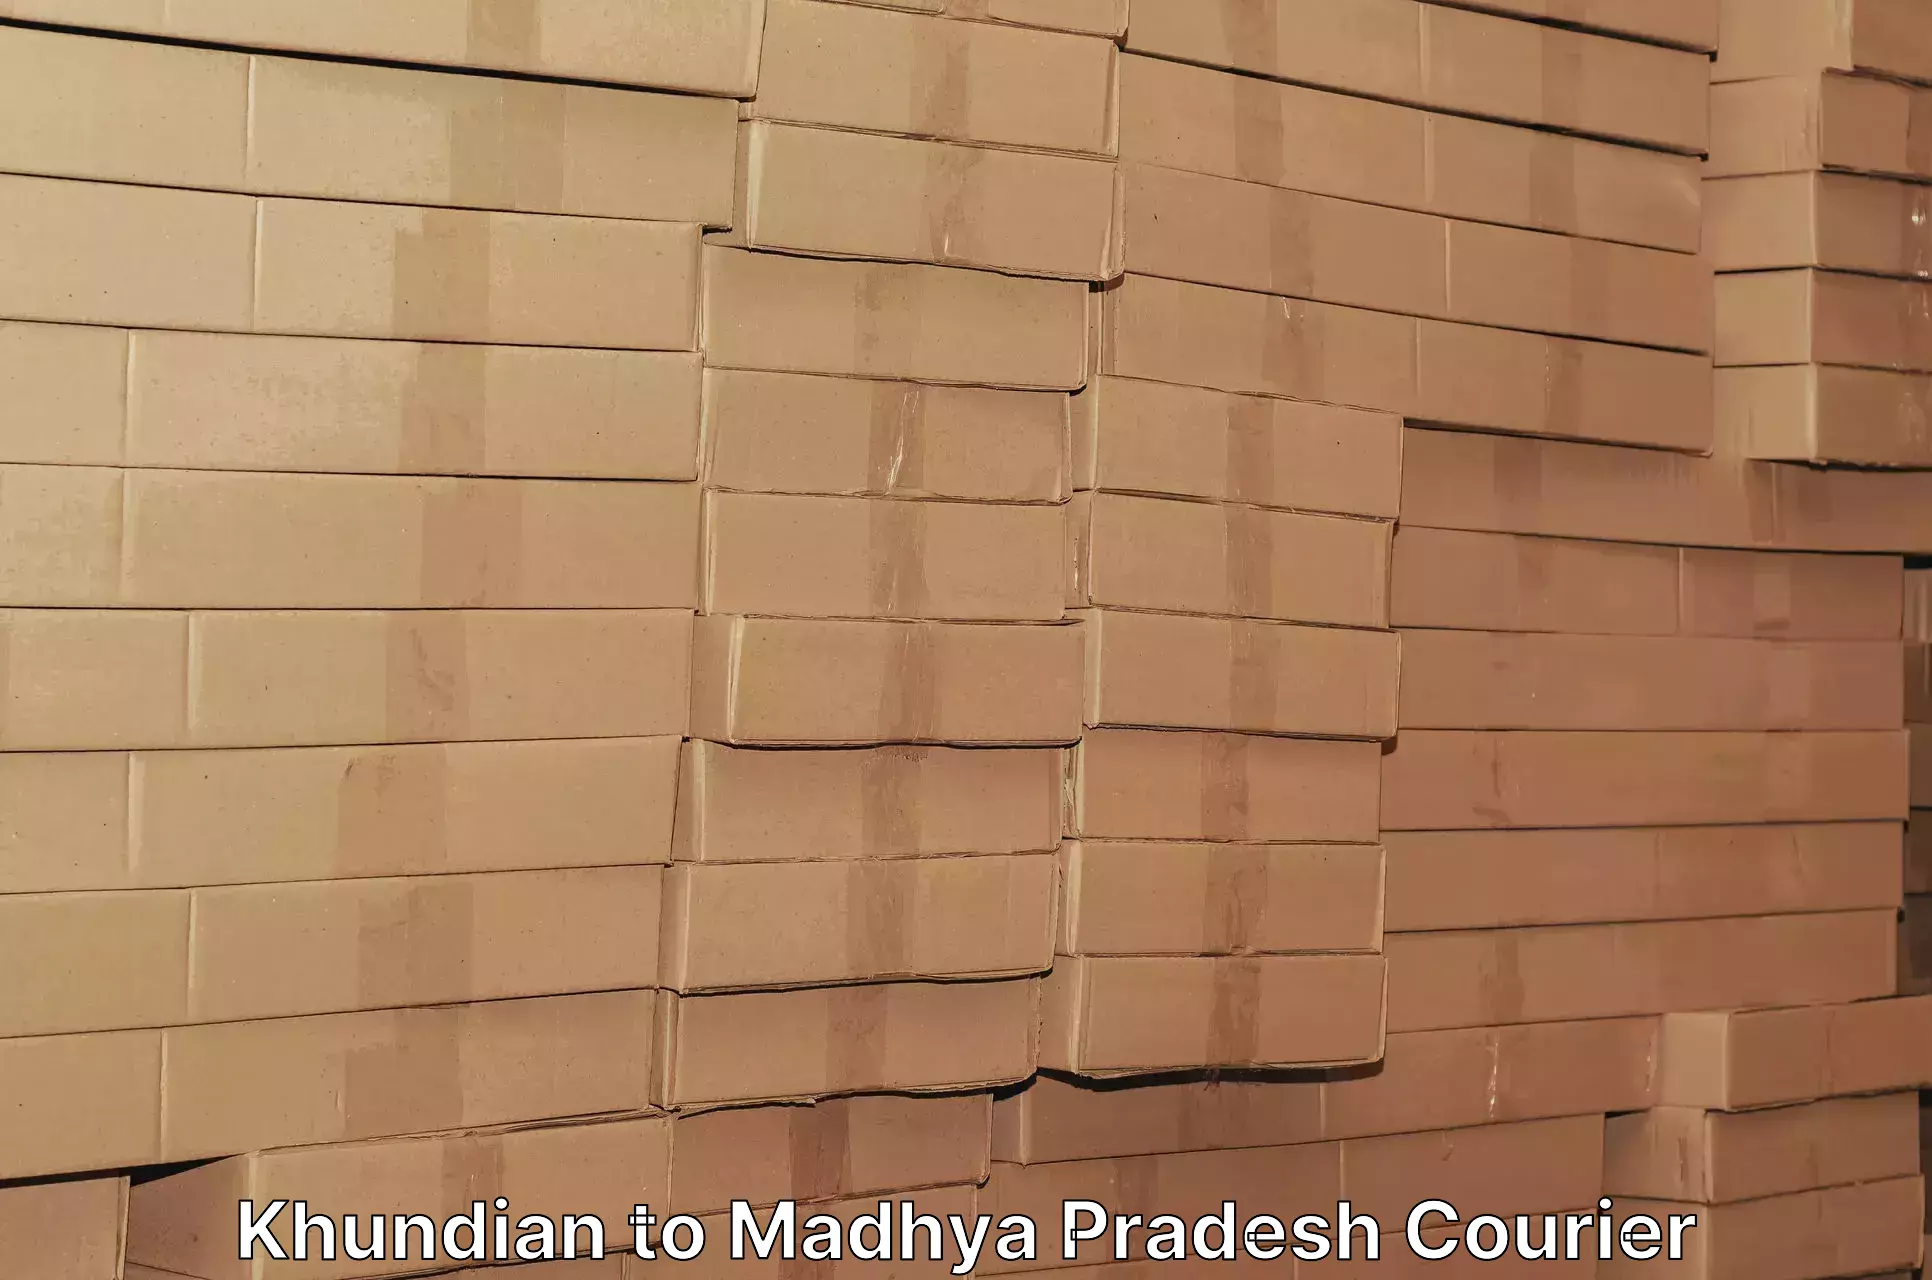 State-of-the-art courier technology Khundian to Madhya Pradesh